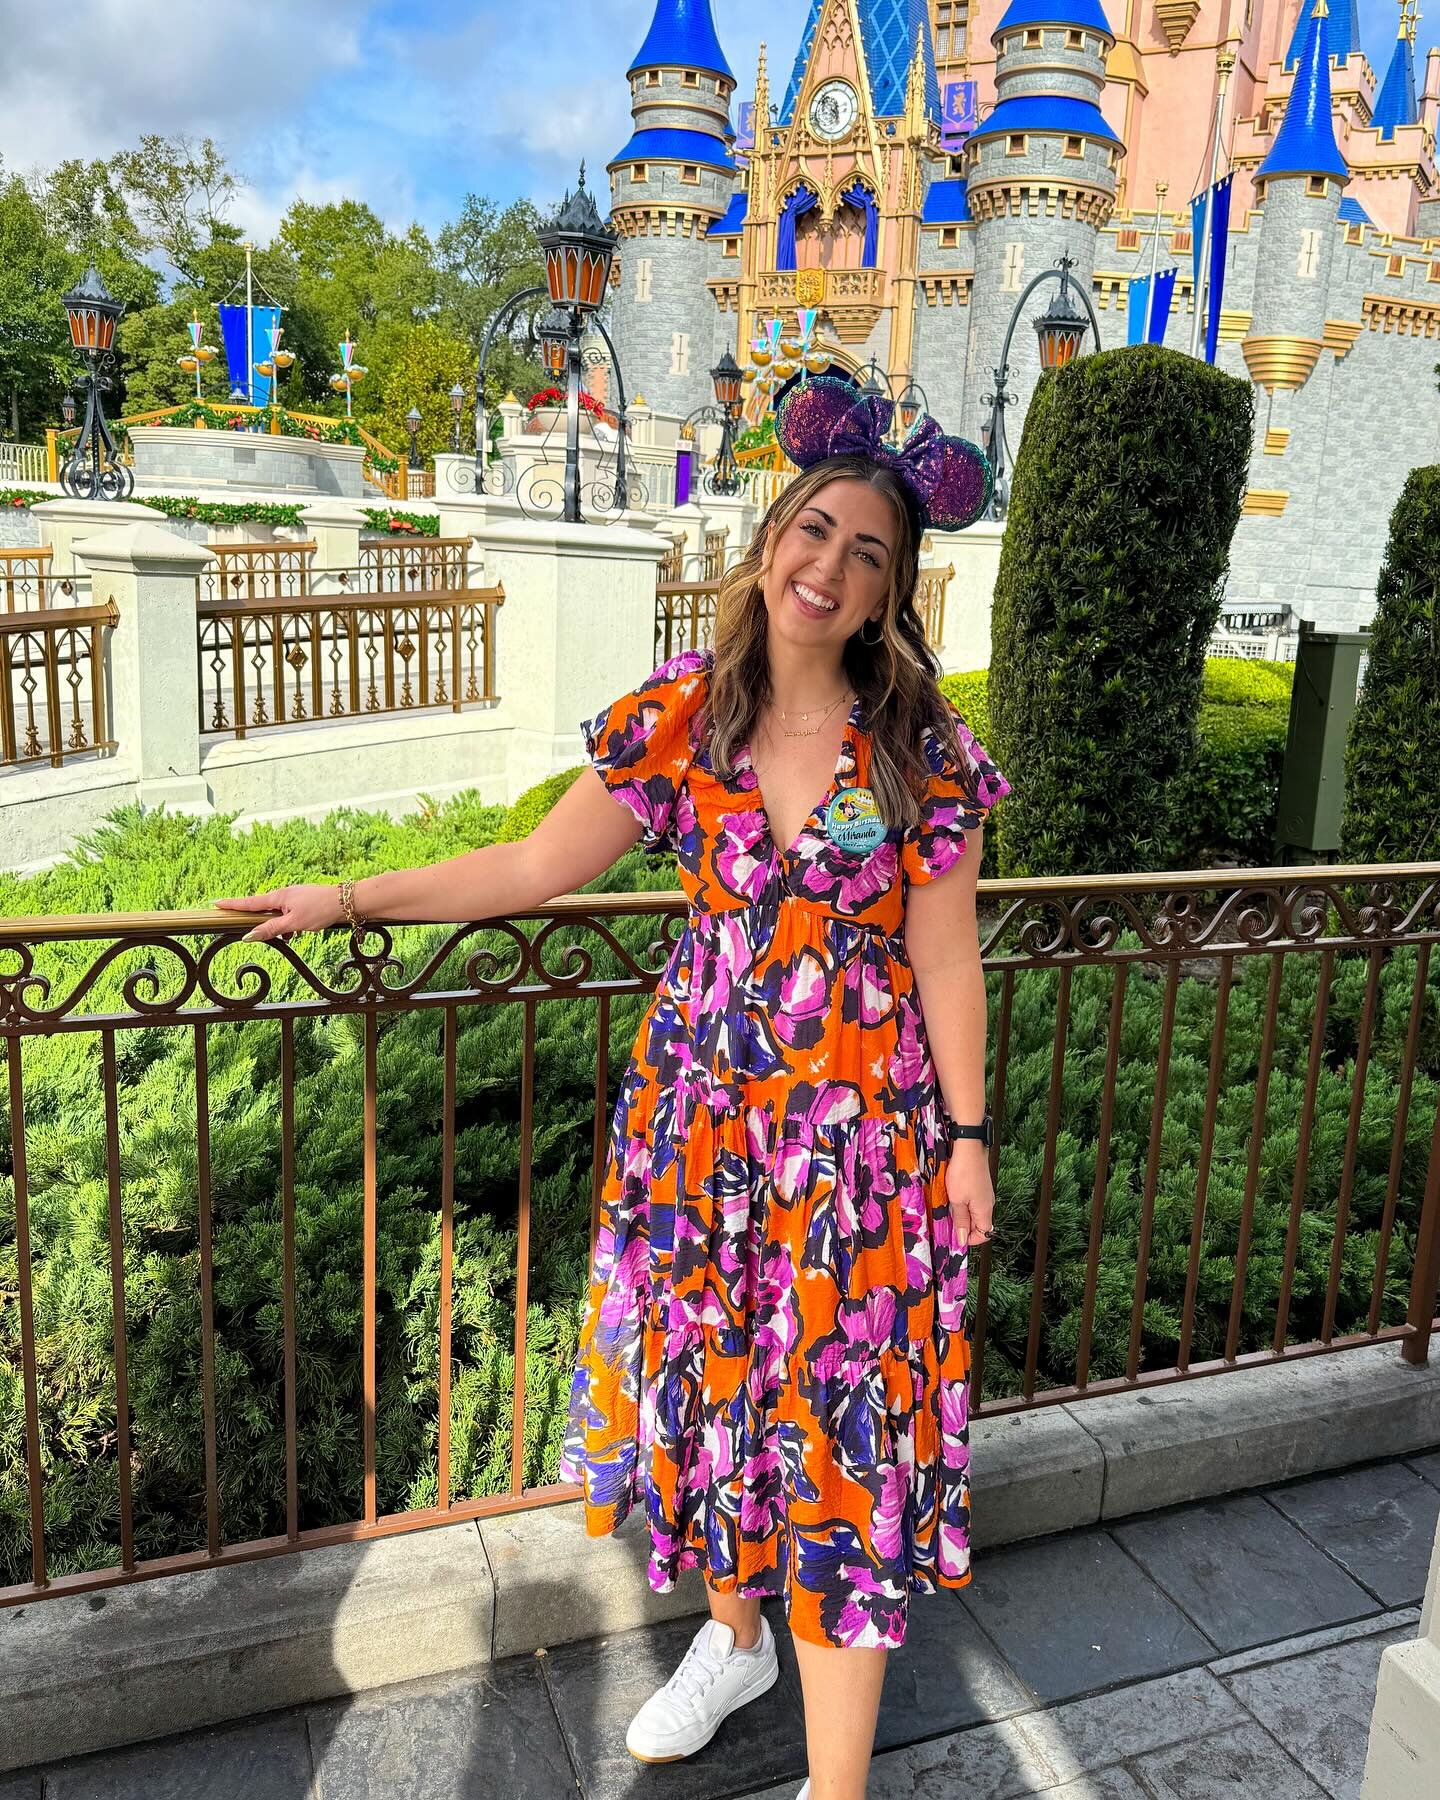 the most magical way to spend a birthday ✨

our last day in Florida and we are going big with four parks in one day! can you believe I&rsquo;ve never done it before?! starting at magic kingdom and ending the night with jollywood nights! I&rsquo;m run